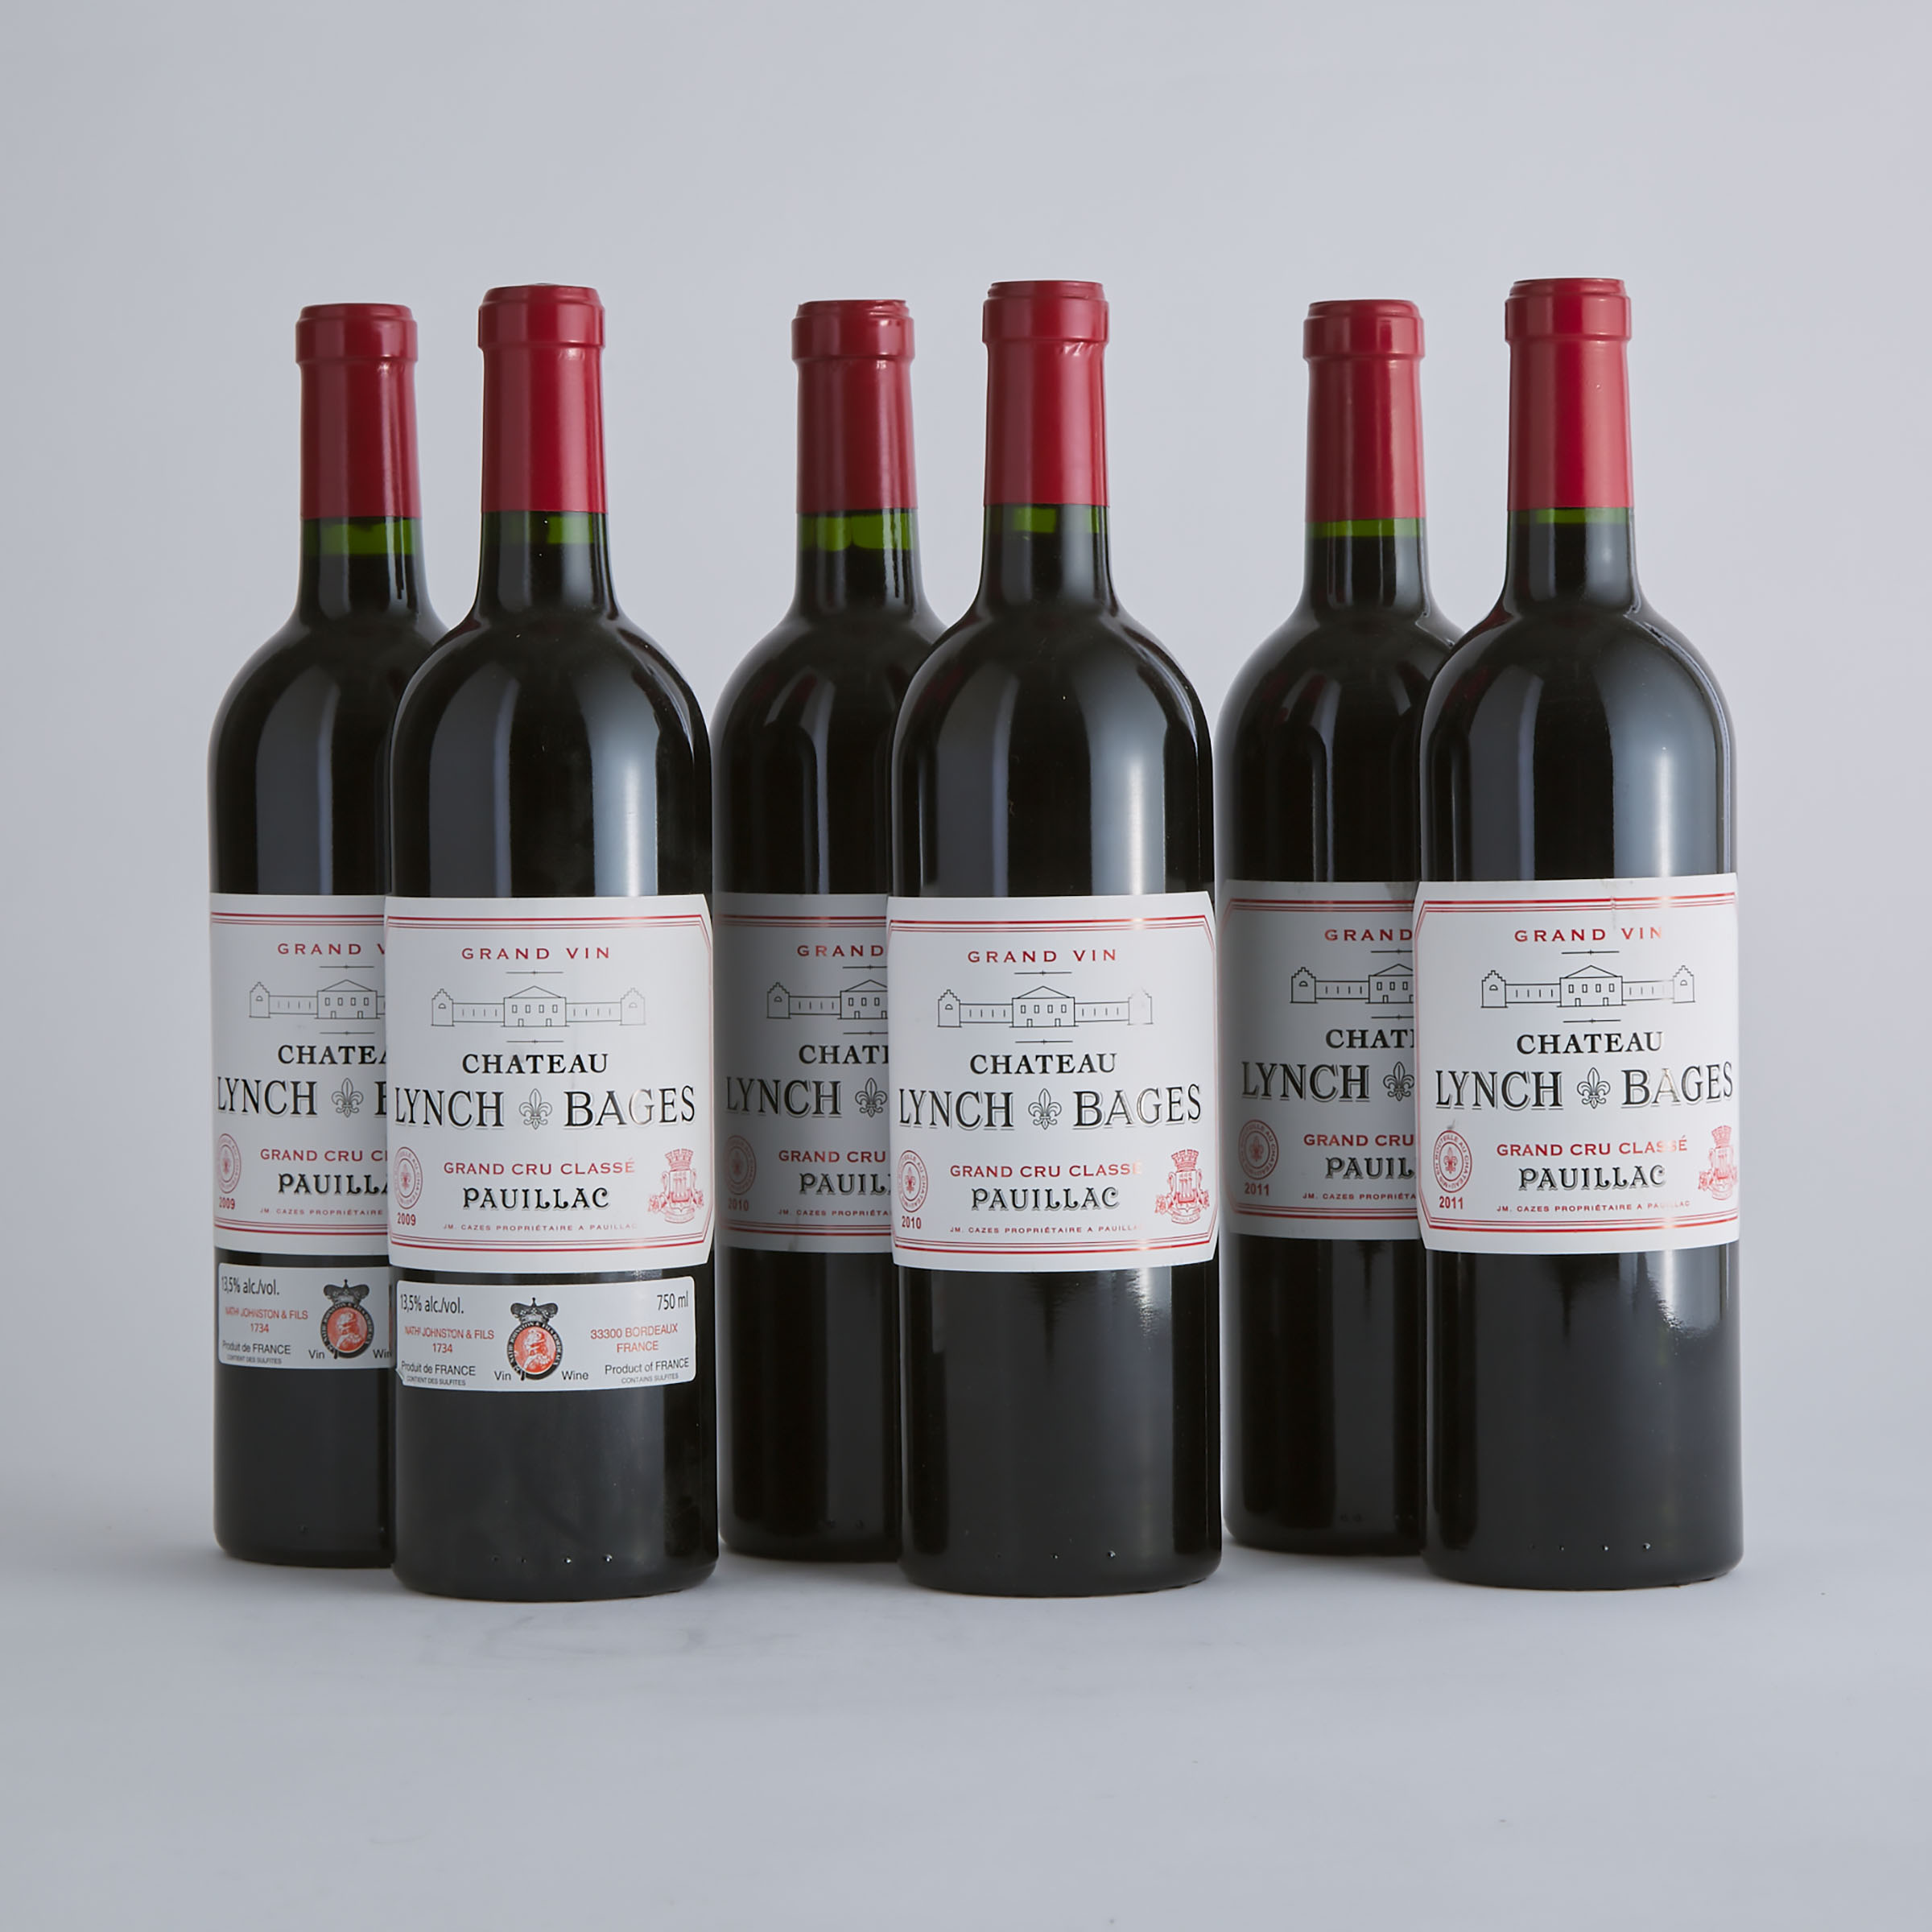 CHÂTEAU LYNCH-BAGES 2009 (2)
CHÂTEAU LYNCH-BAGES 2010 (2)
CHÂTEAU LYNCH-BAGES 2011 (2)